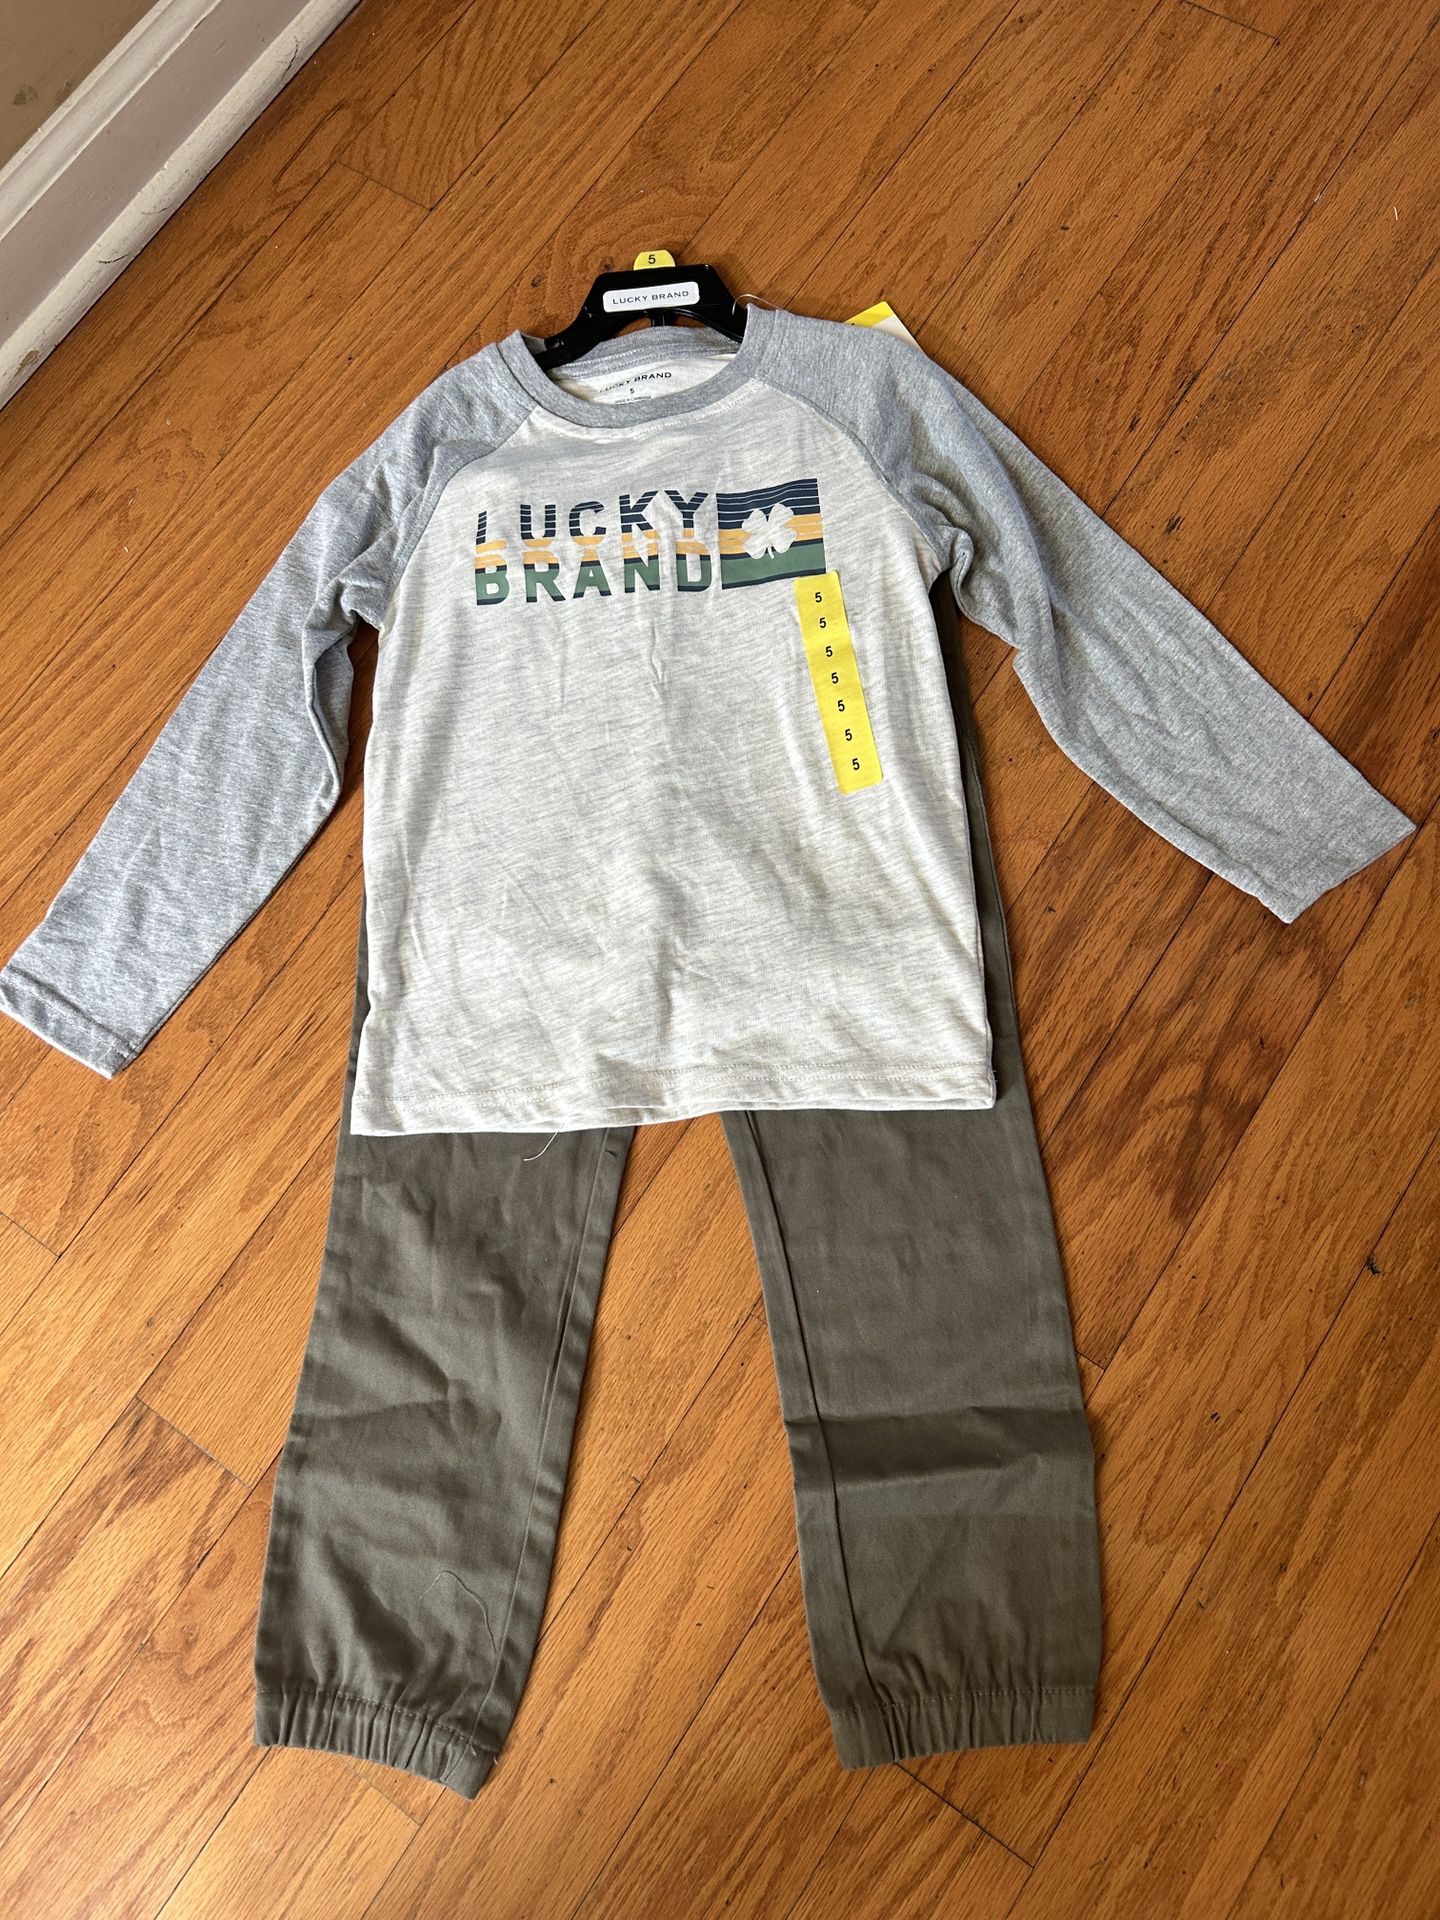 NWT Lucky Brand boys 2pcs outfit set size 5